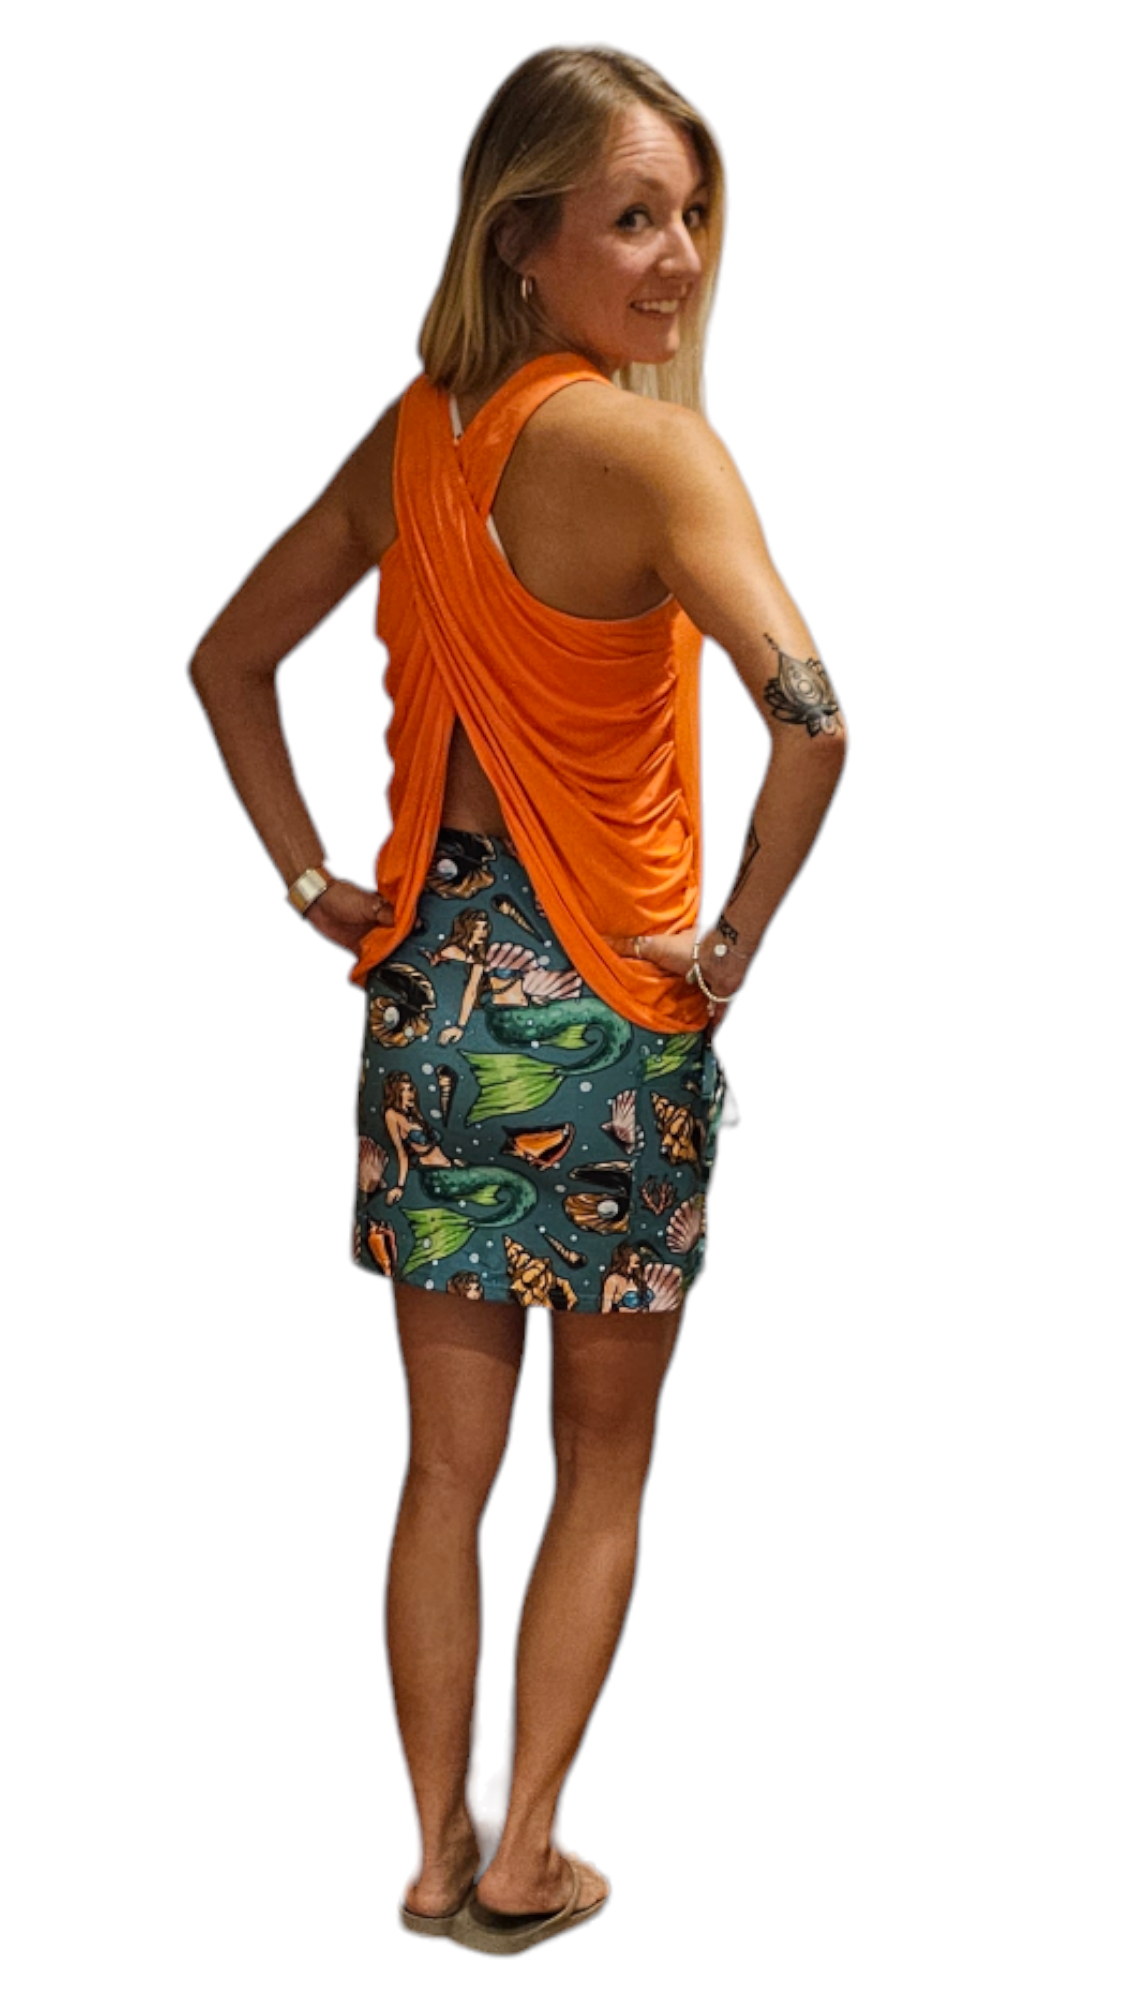 YOGAZ New Mermaid Skorts are here In Sizes Extra Extra Small to XXL